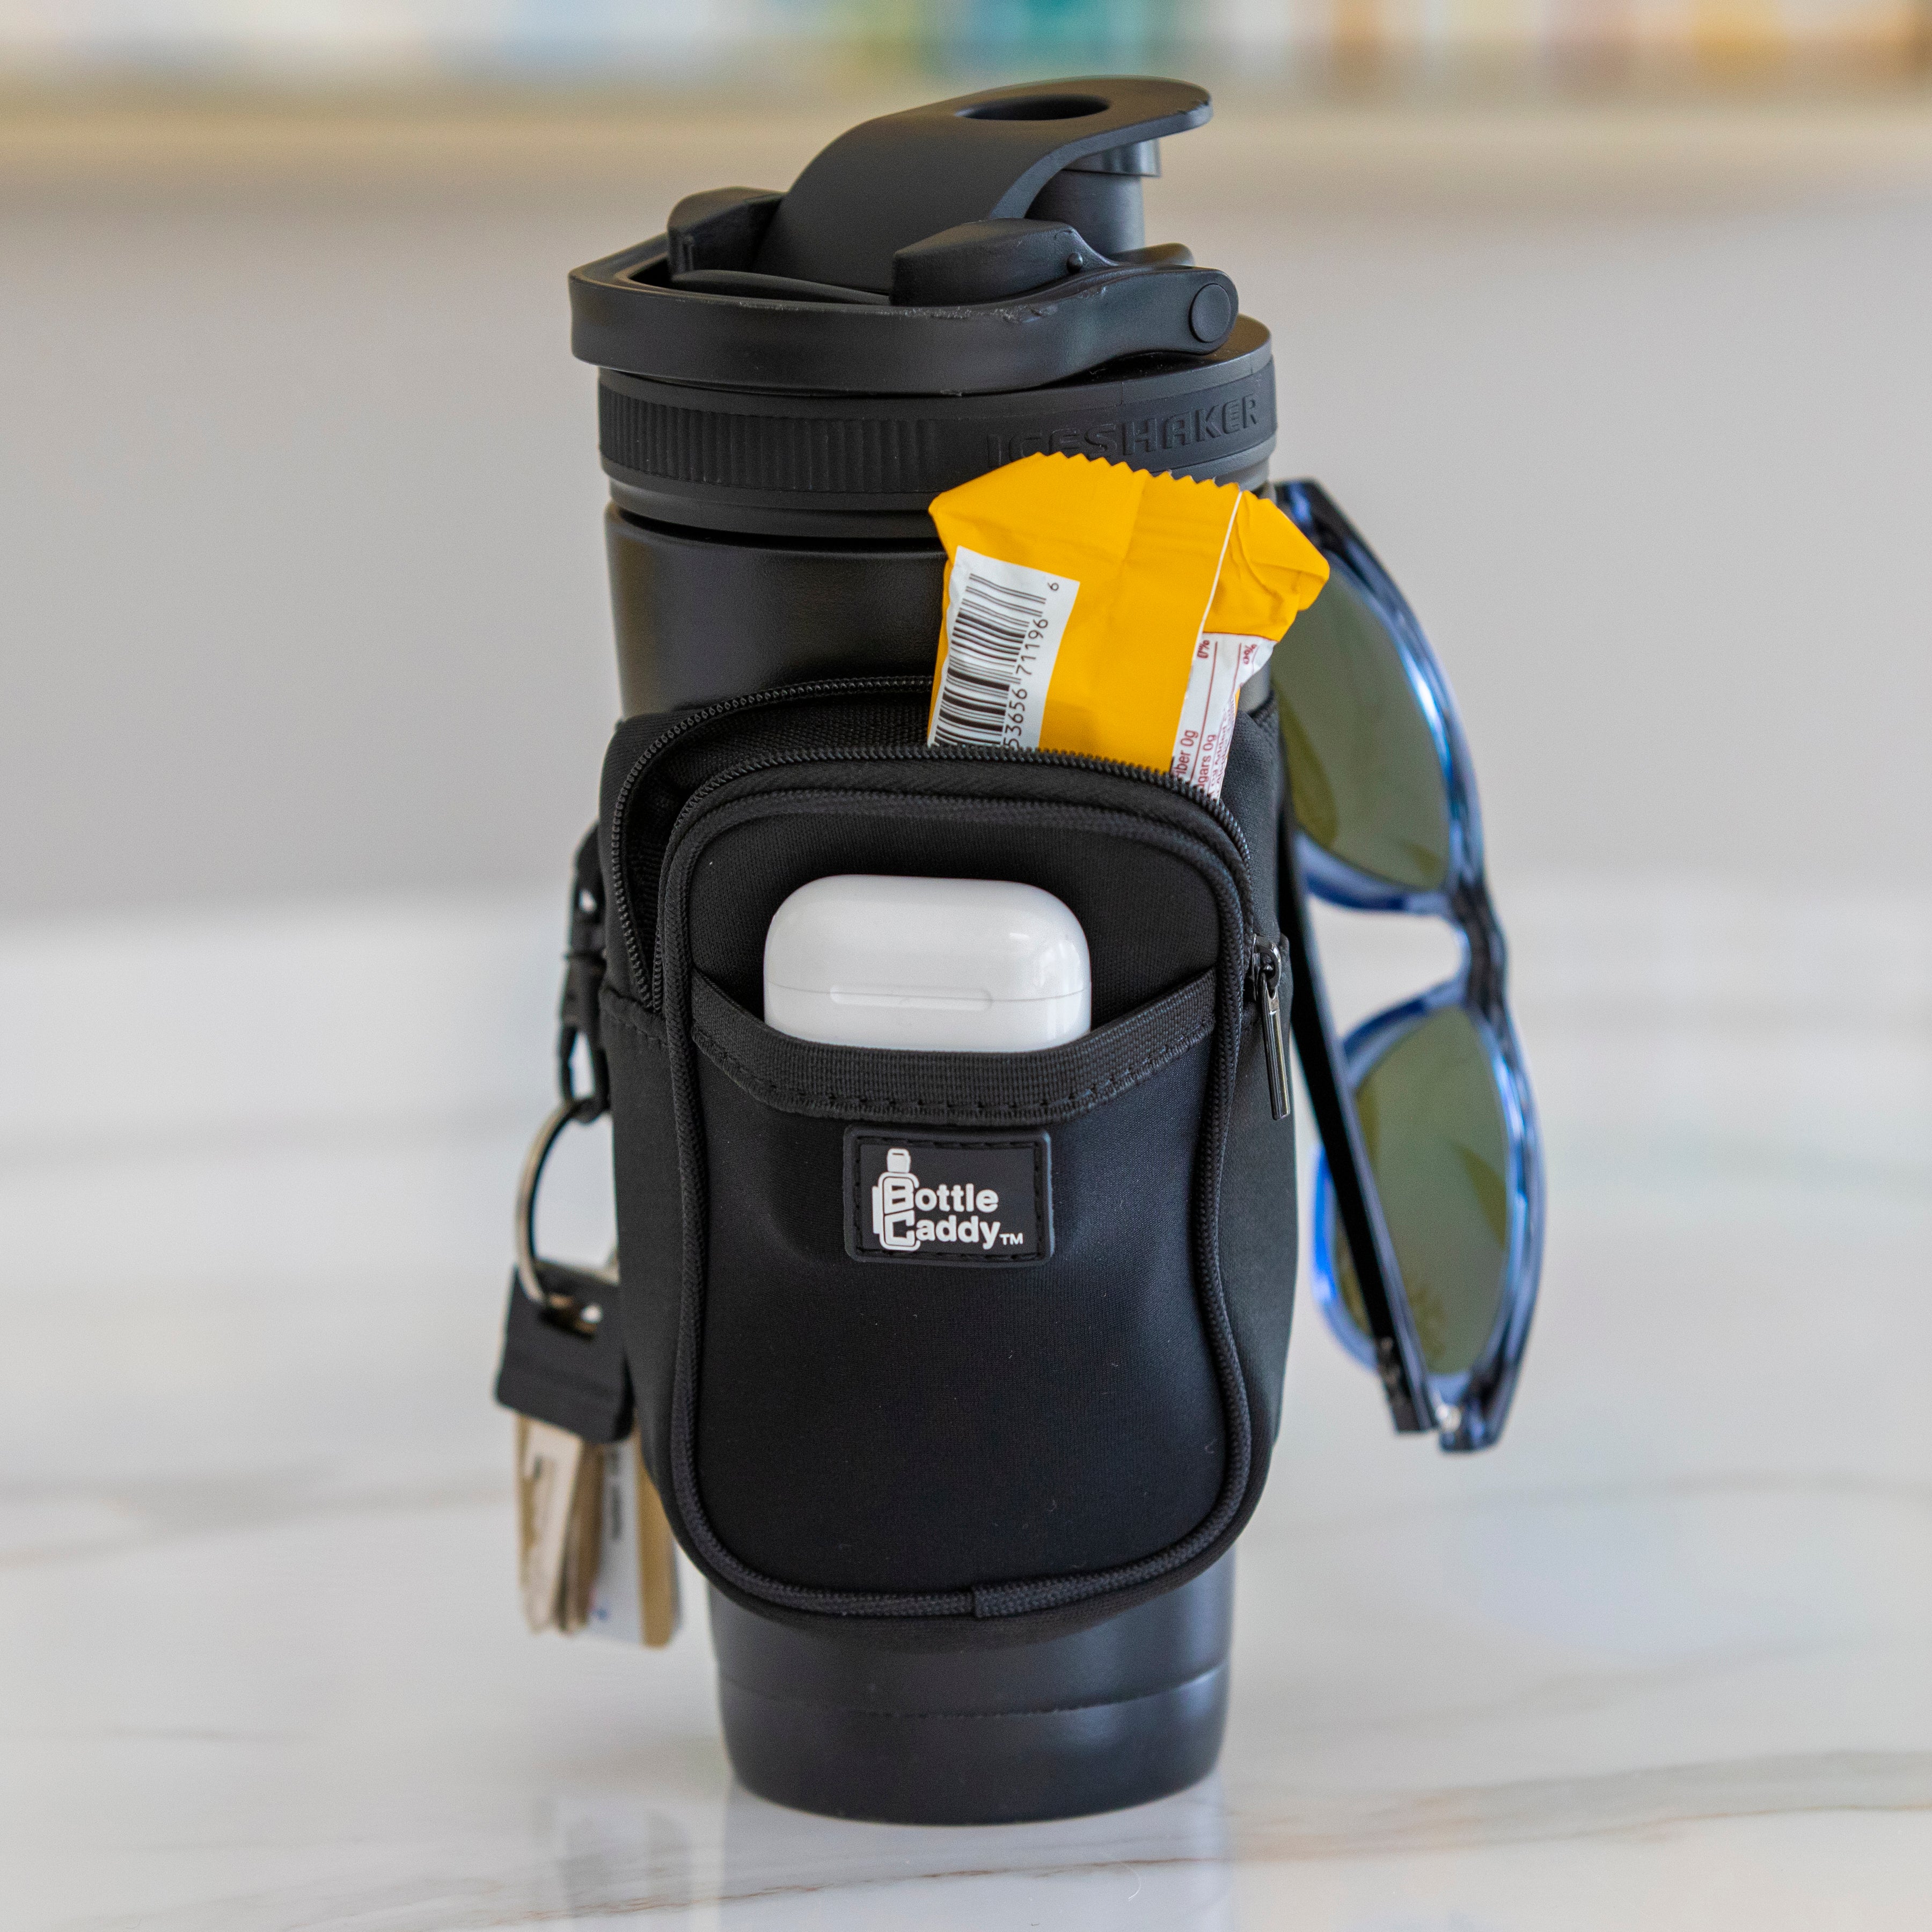 Review of Go Caddy Compact Tote and Water Bottle Carrier